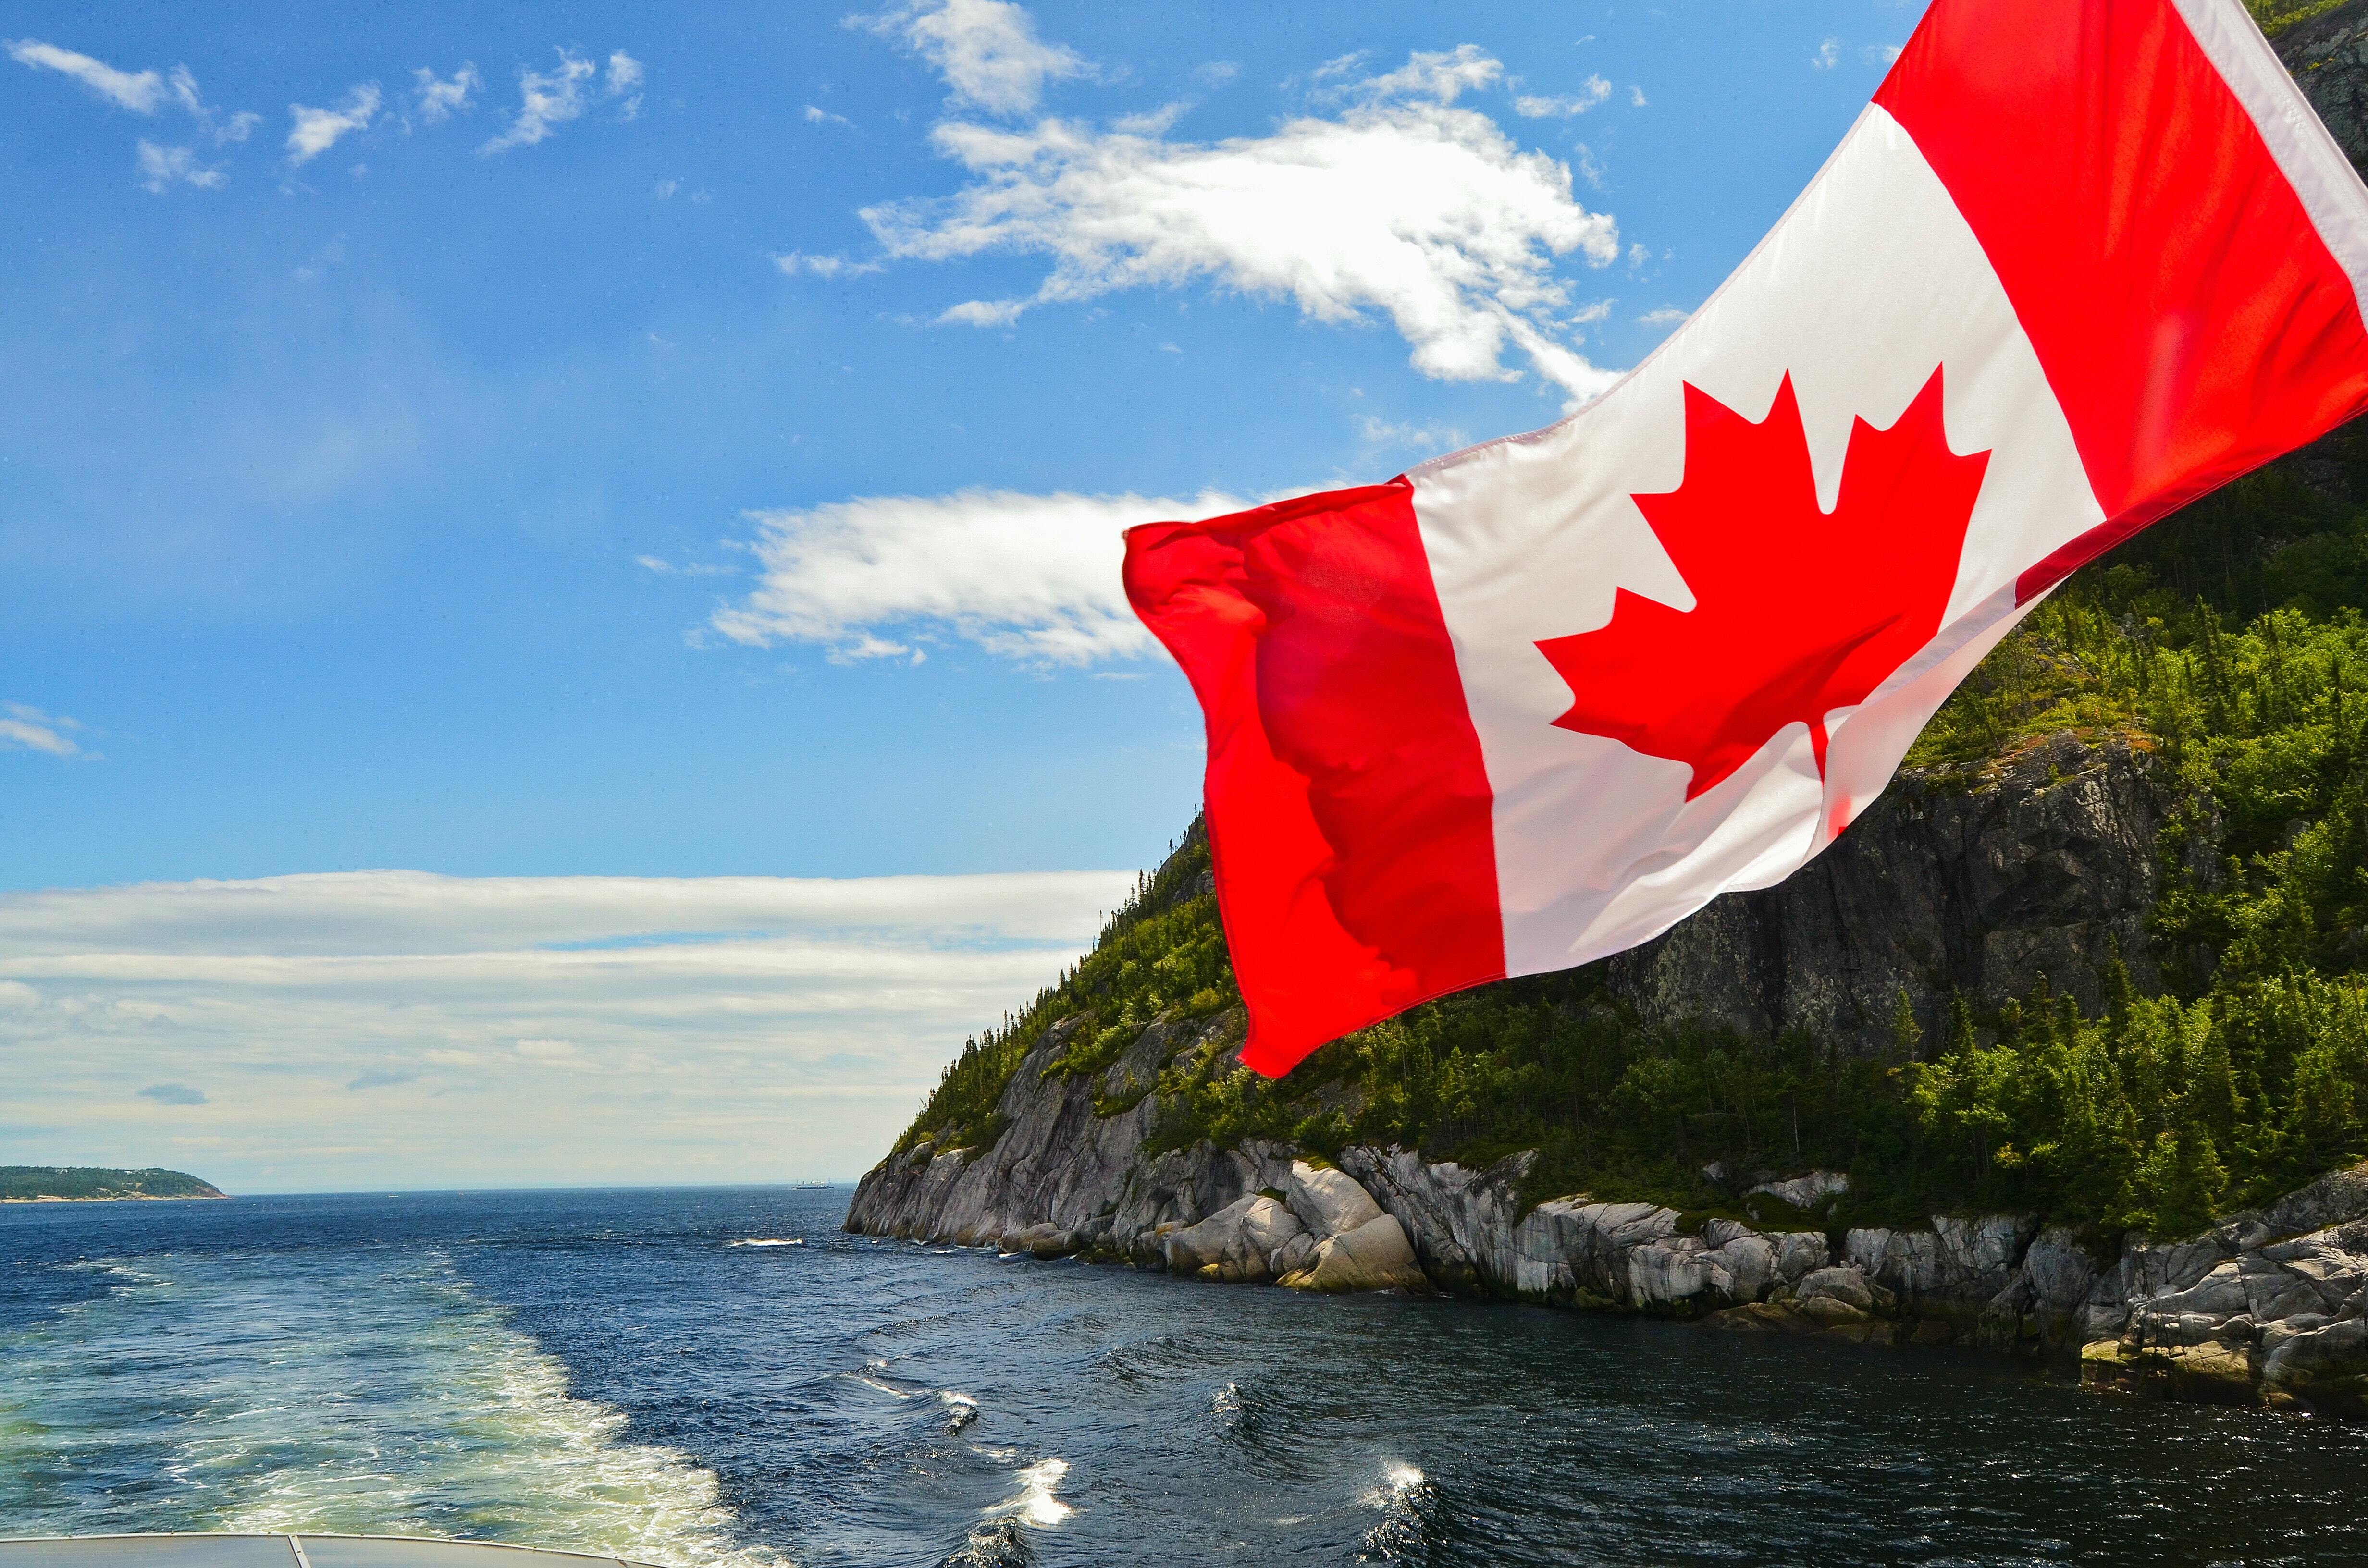 Canadian flag with cliffs and ocean background on a sunnet day.